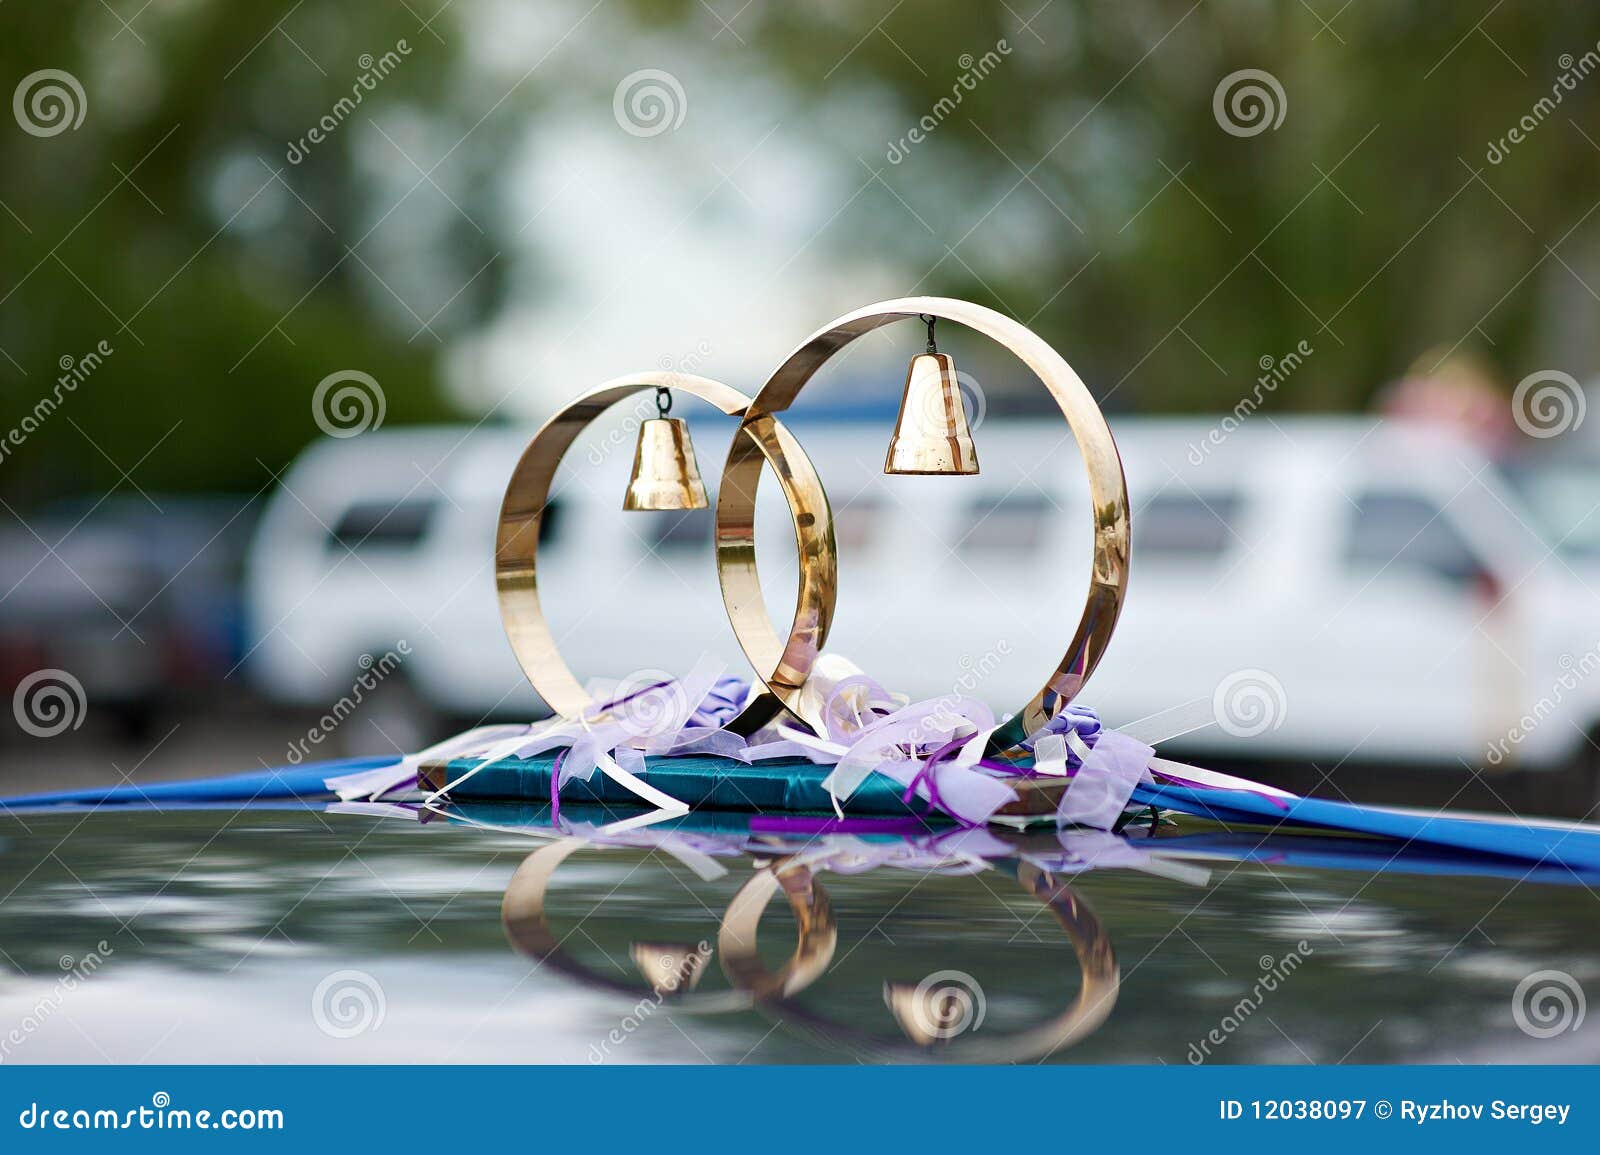 Wedding ornament by rings stock image. Image of success - 12038097